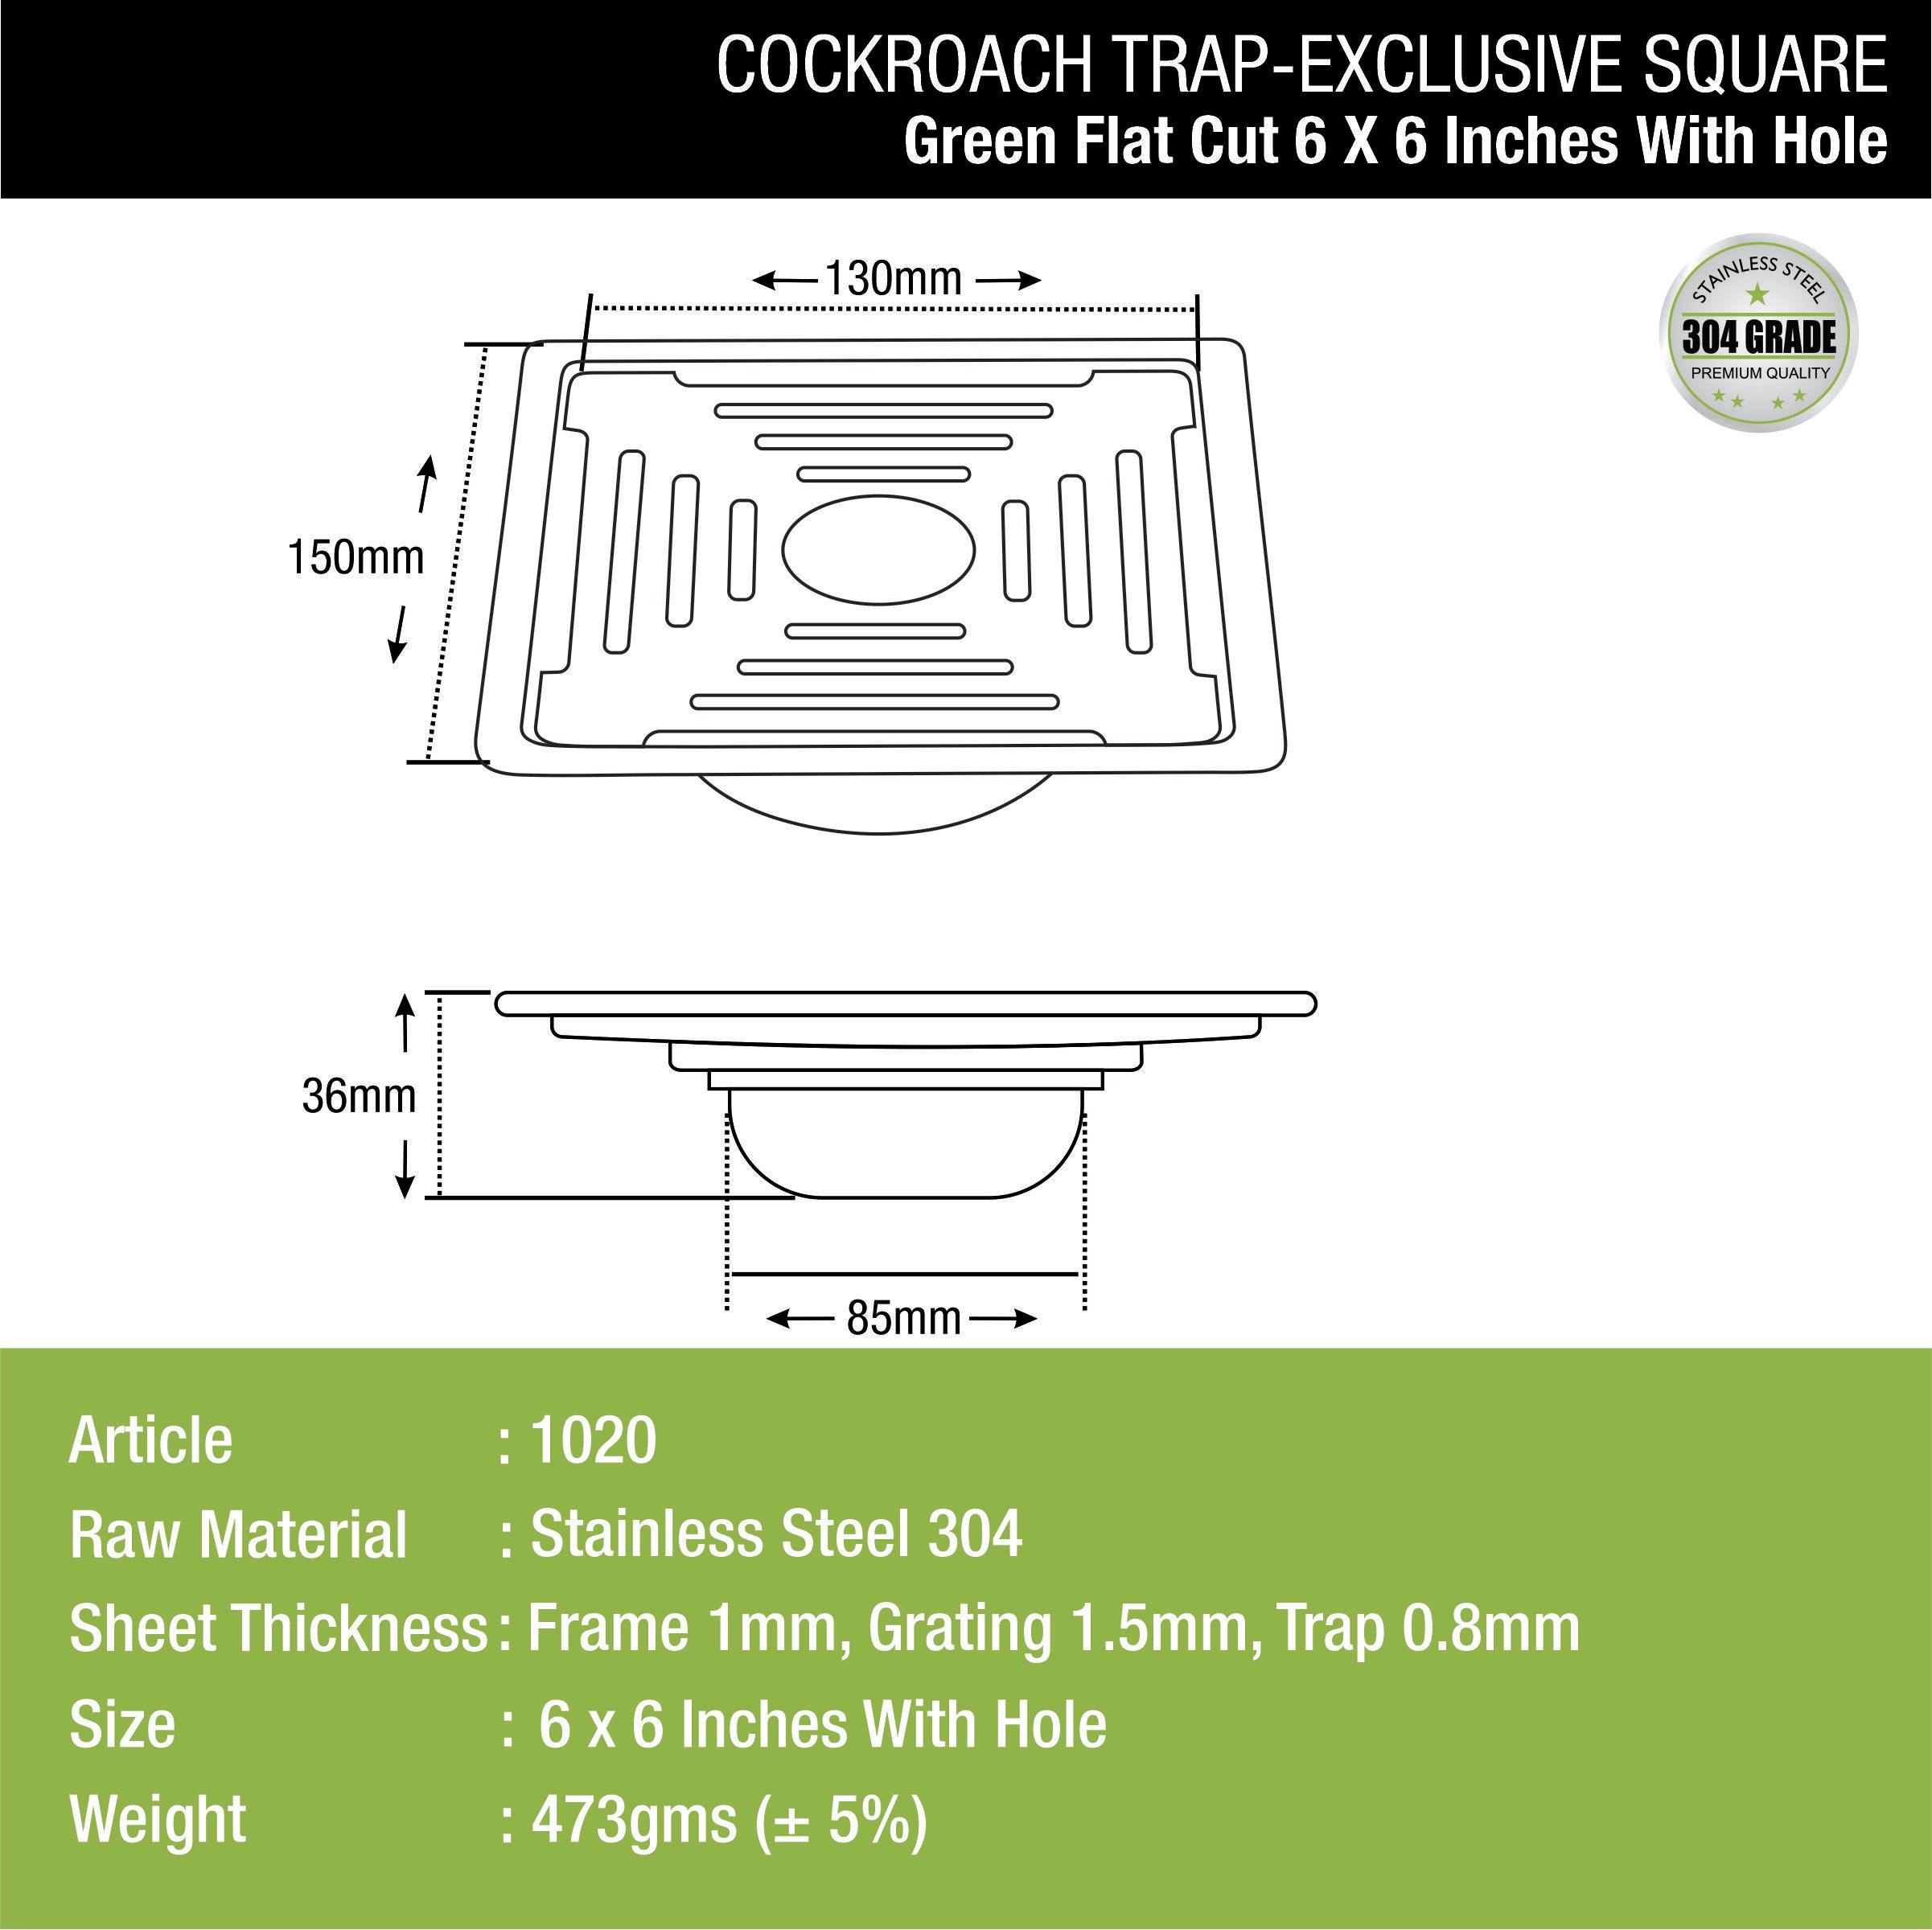 Green Exclusive Square Flat Cut Floor Drain (6 x 6 Inches) with Hole and Cockroach Trap dimensions and sizes